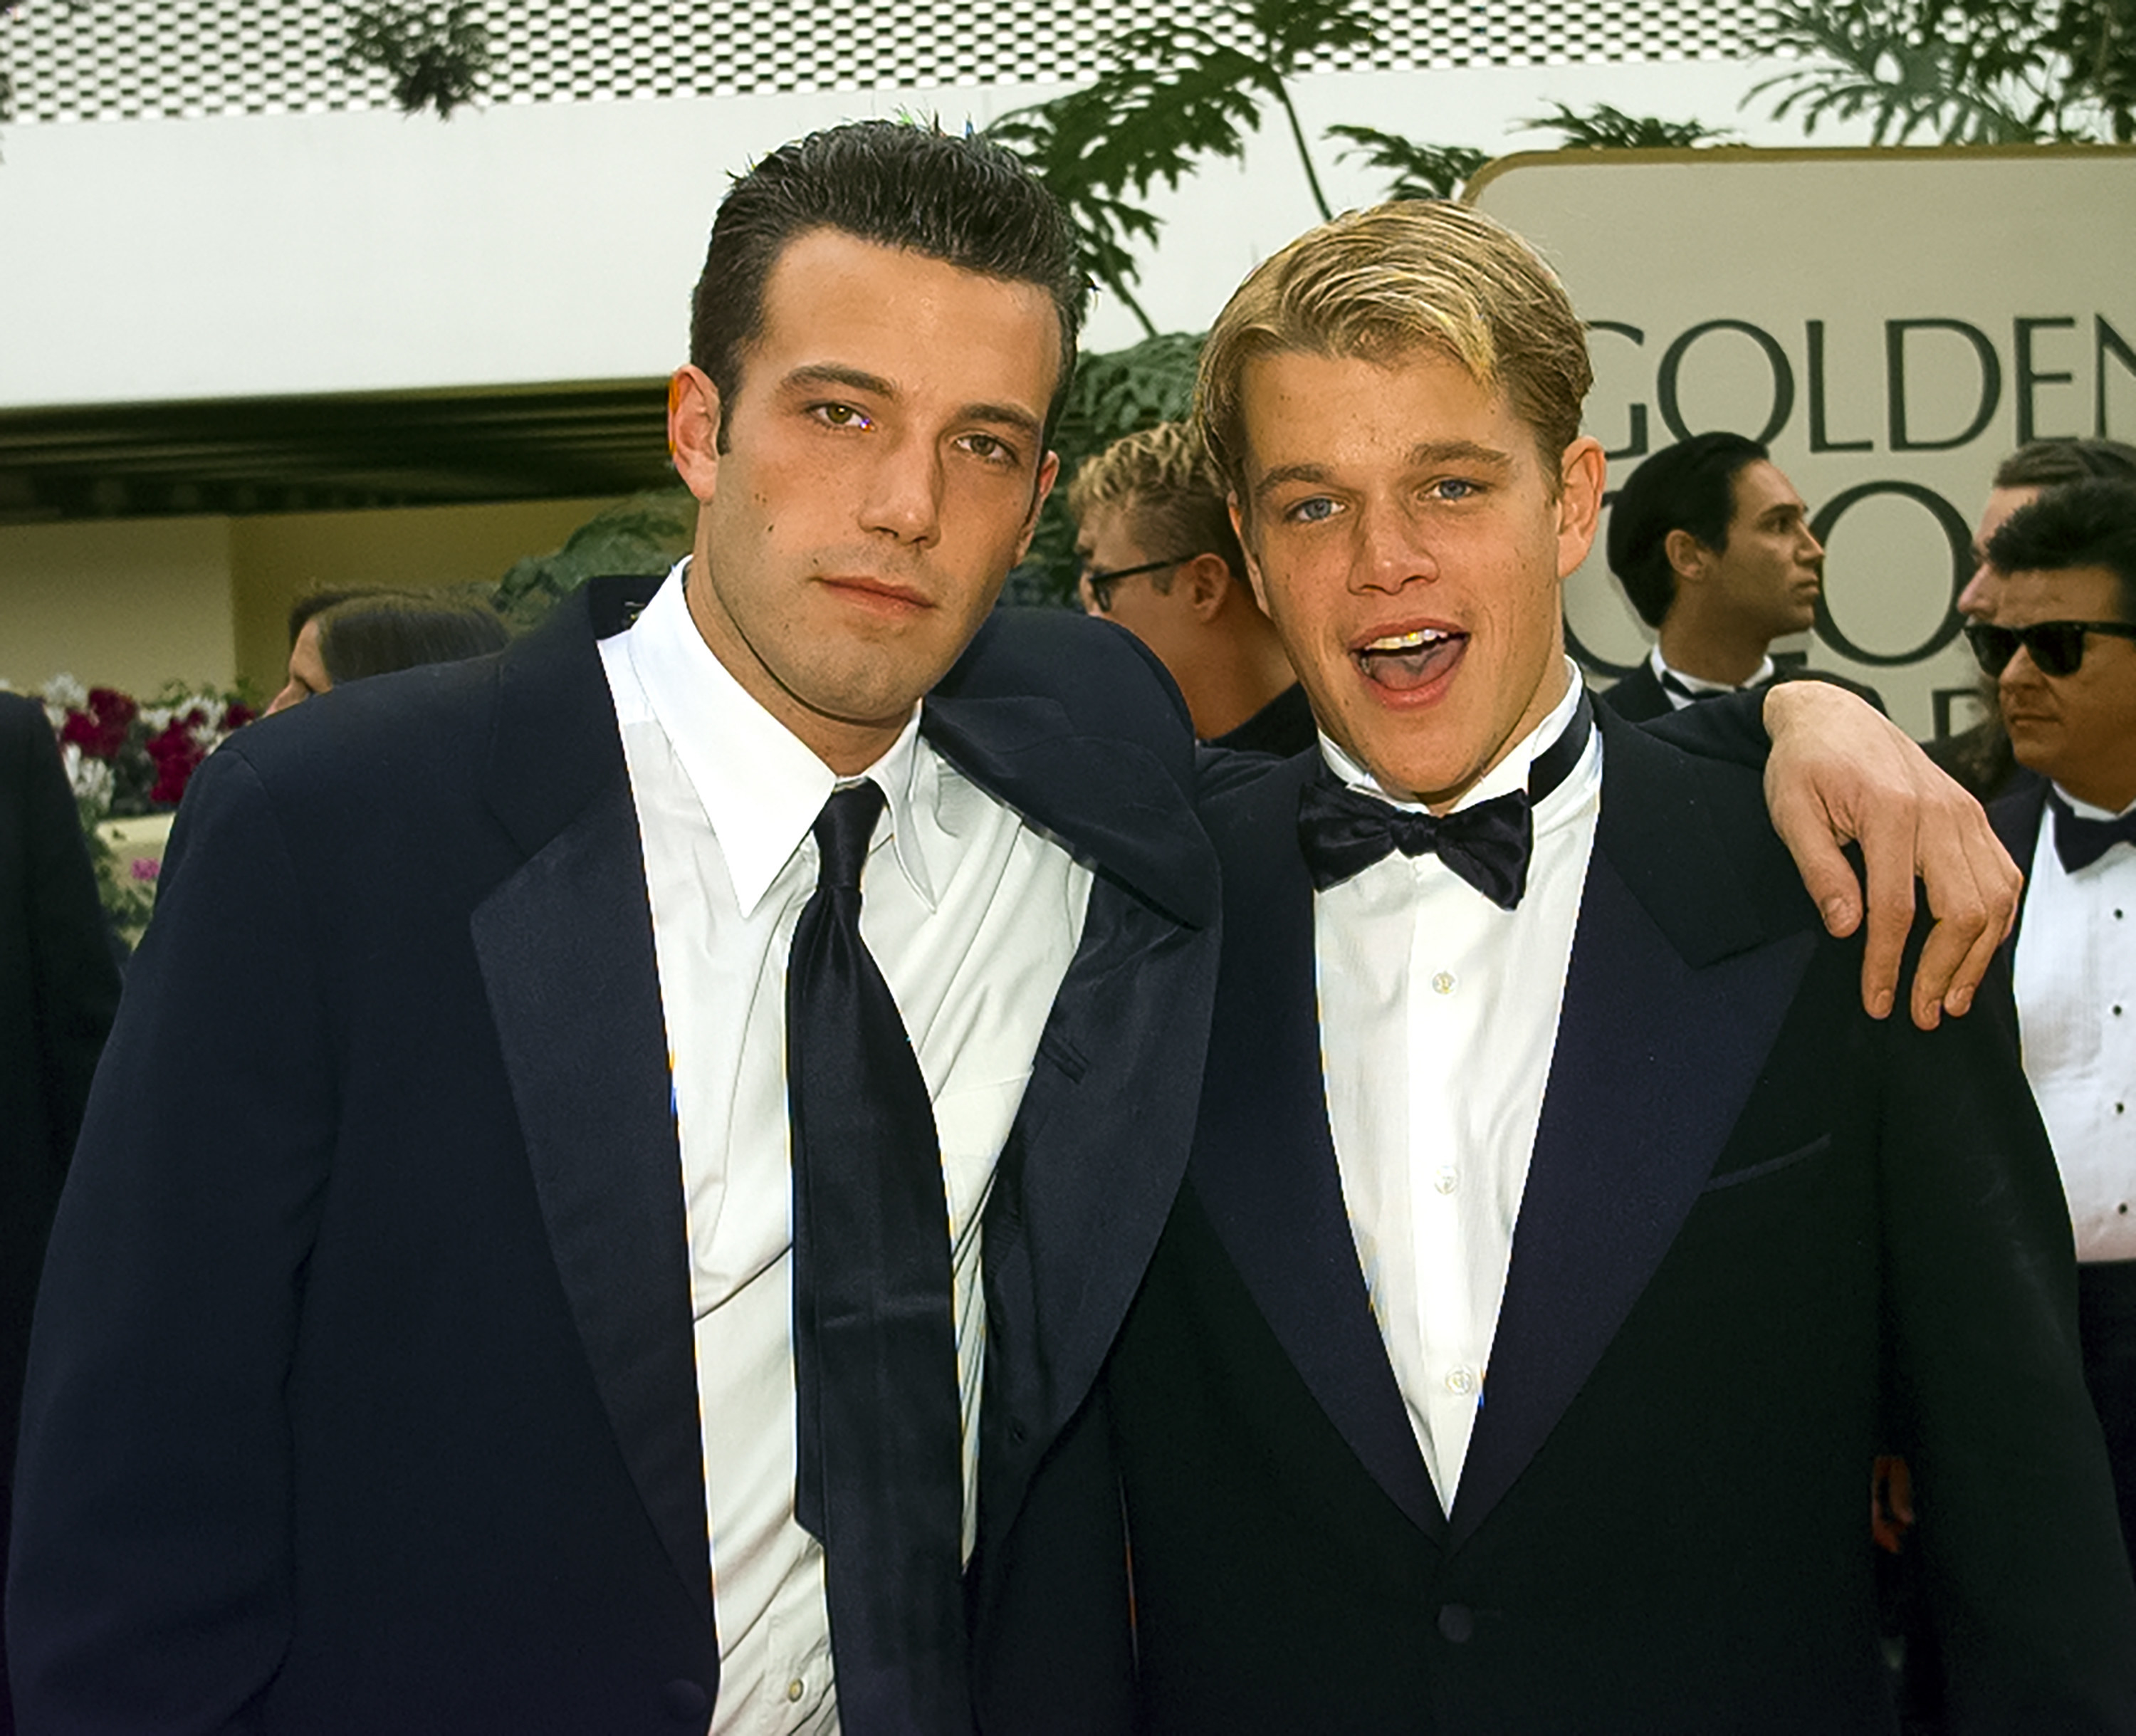 Behind-the-Scenes Friendships That Transcended Hollywood